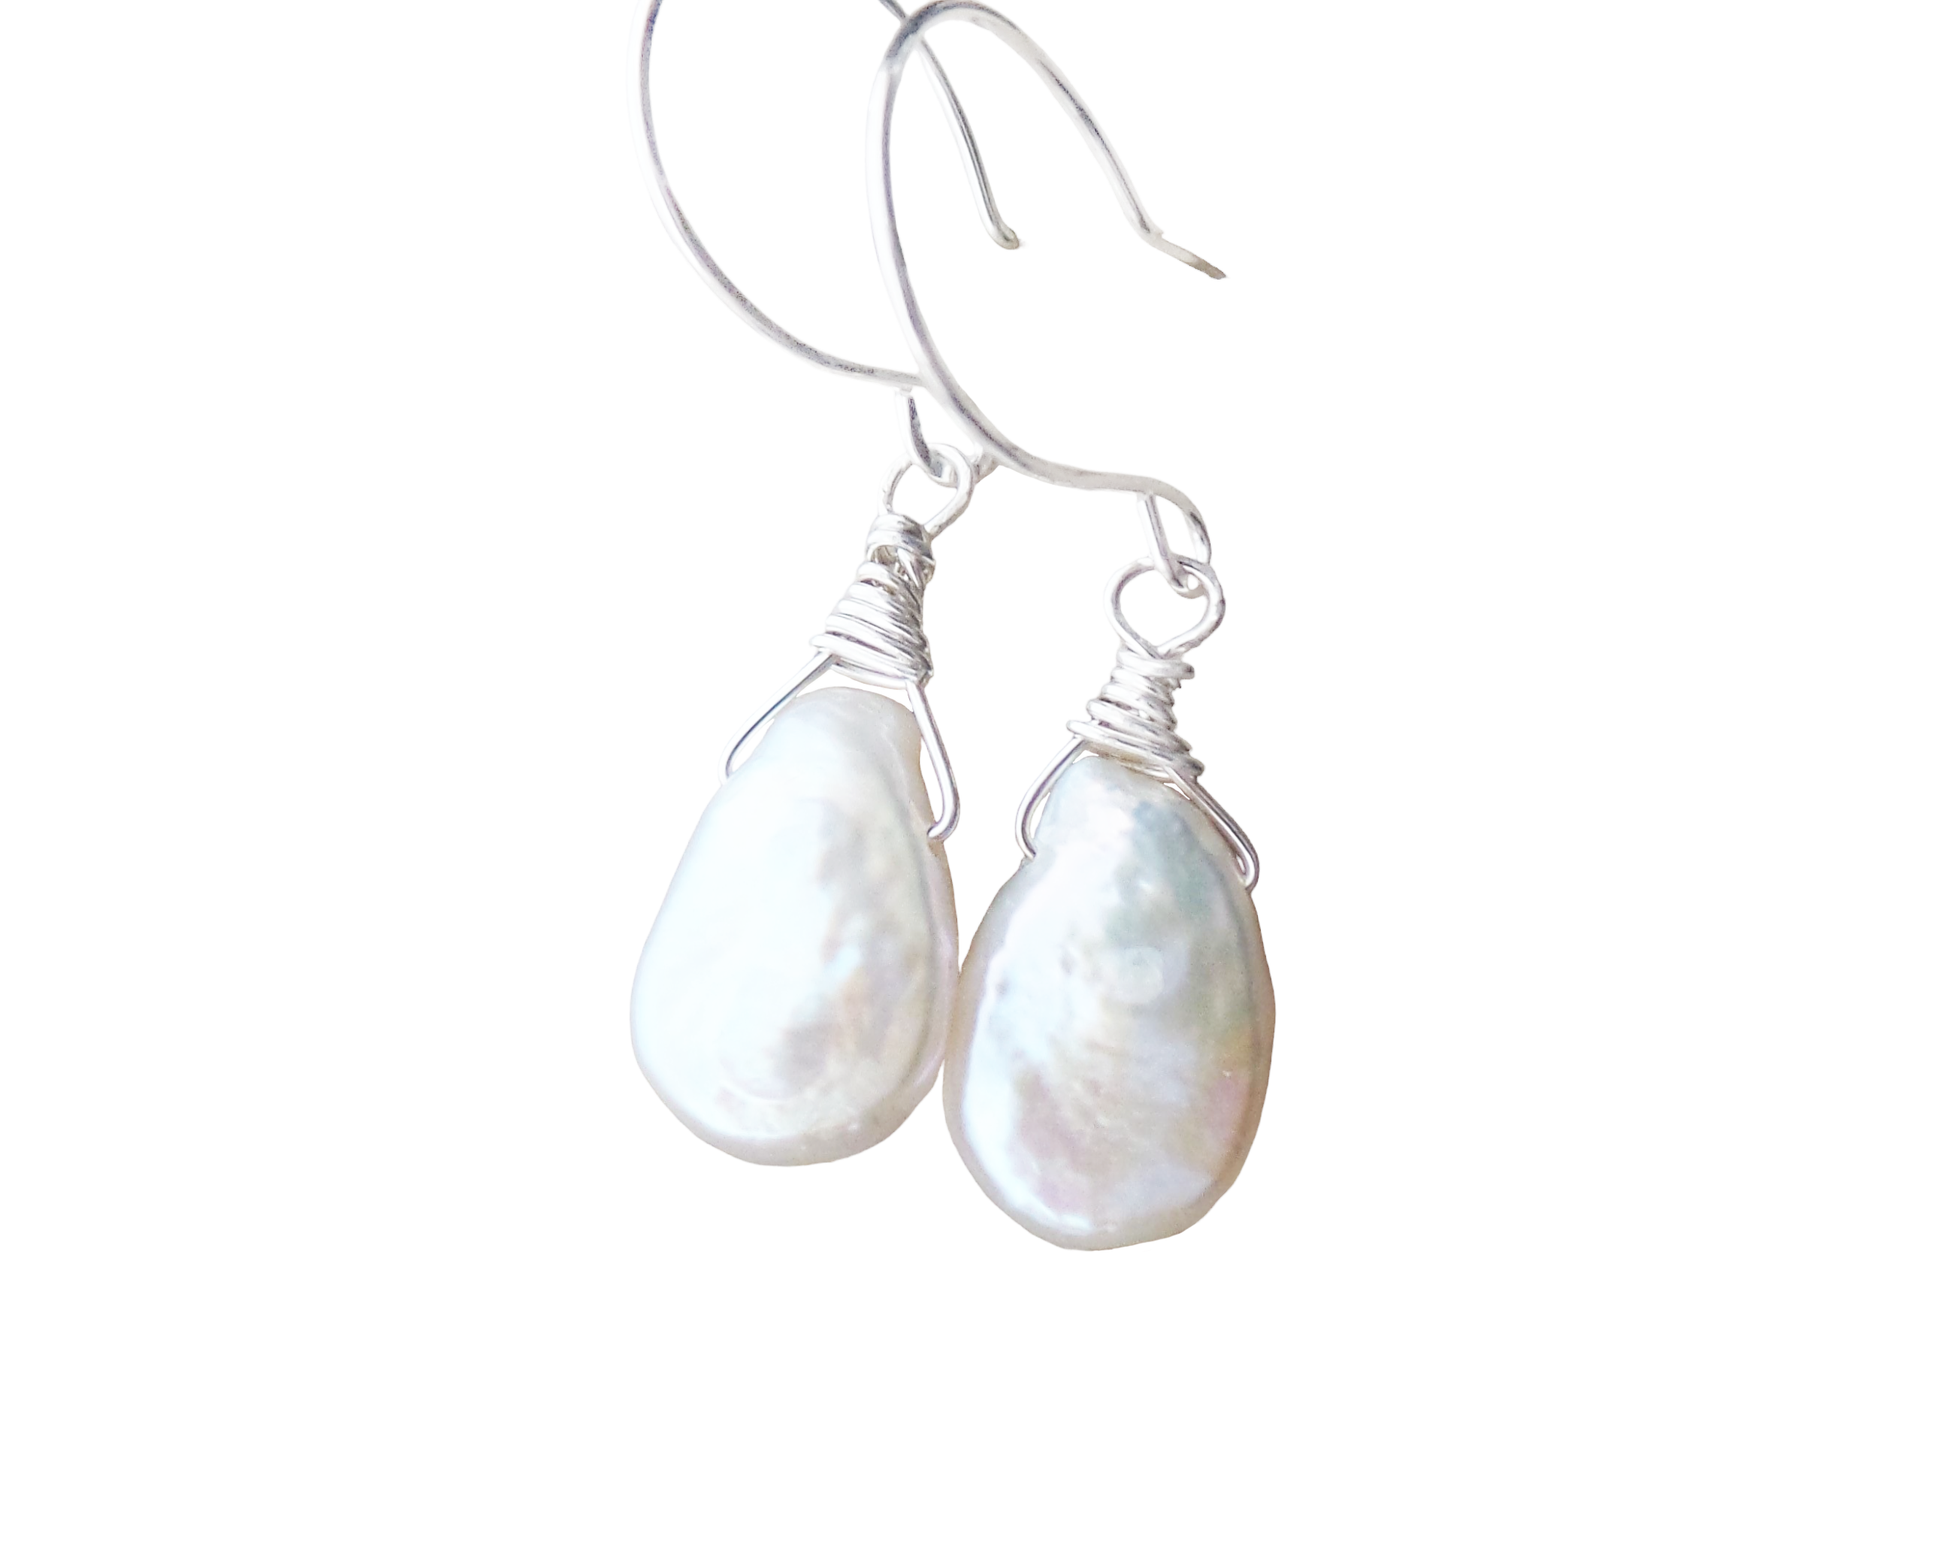 Luxurious Freshwater Cultured Pearl Drop Earrings with Sterling Silver French style earring hooks